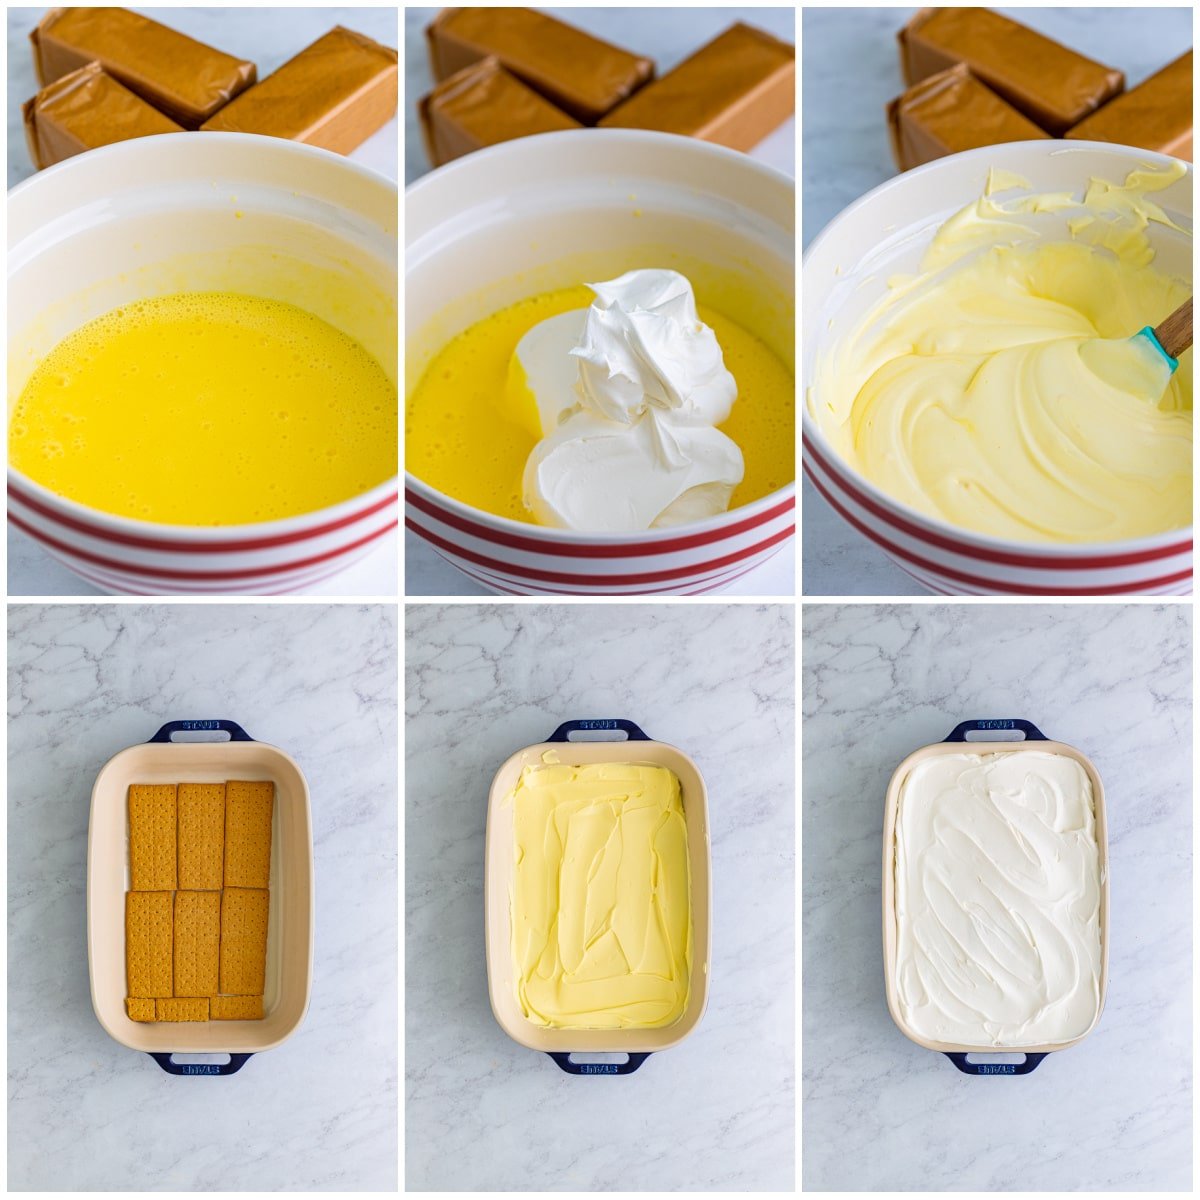 Step by step photos on how to make a Banana Icebox Cake.